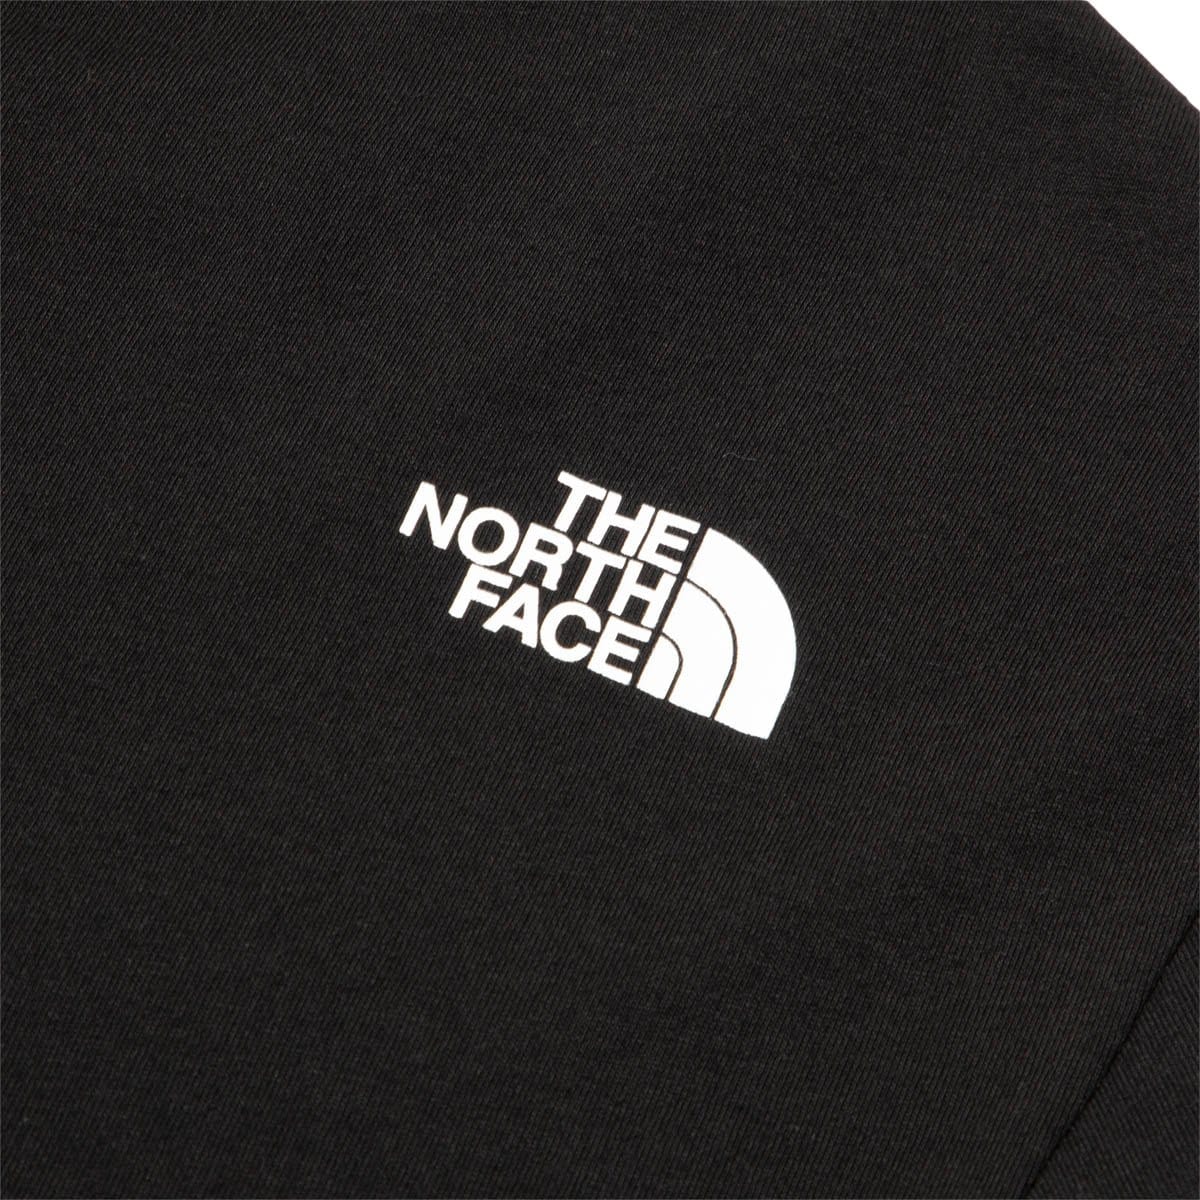 The North Face Black Box Collection T-Shirts BLACK BOX S/S GRAPHIC TEE